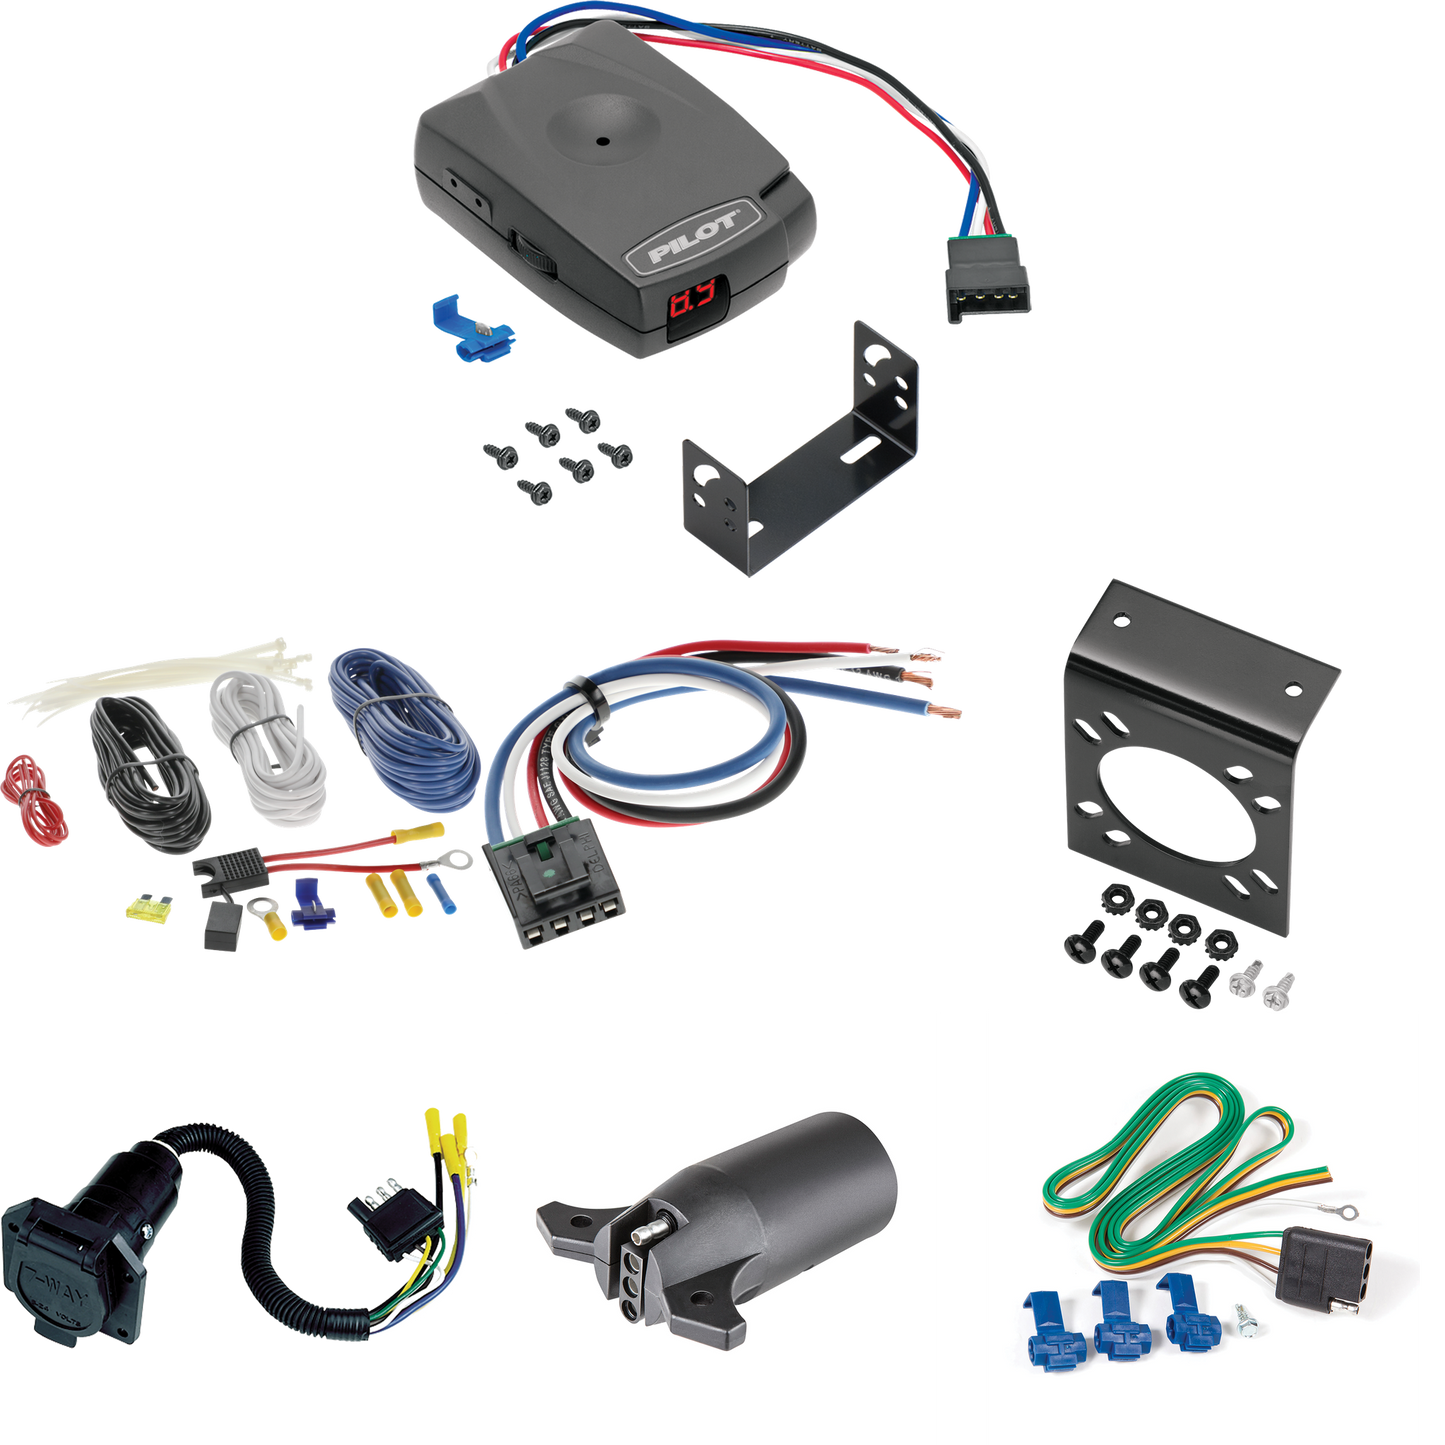 Fits 1984-1990 Dodge Caravan 7-Way RV Wiring + Pro Series Pilot Brake Control + Generic BC Wiring Adapter + 7-Way to 4-Way Adapter By Reese Towpower